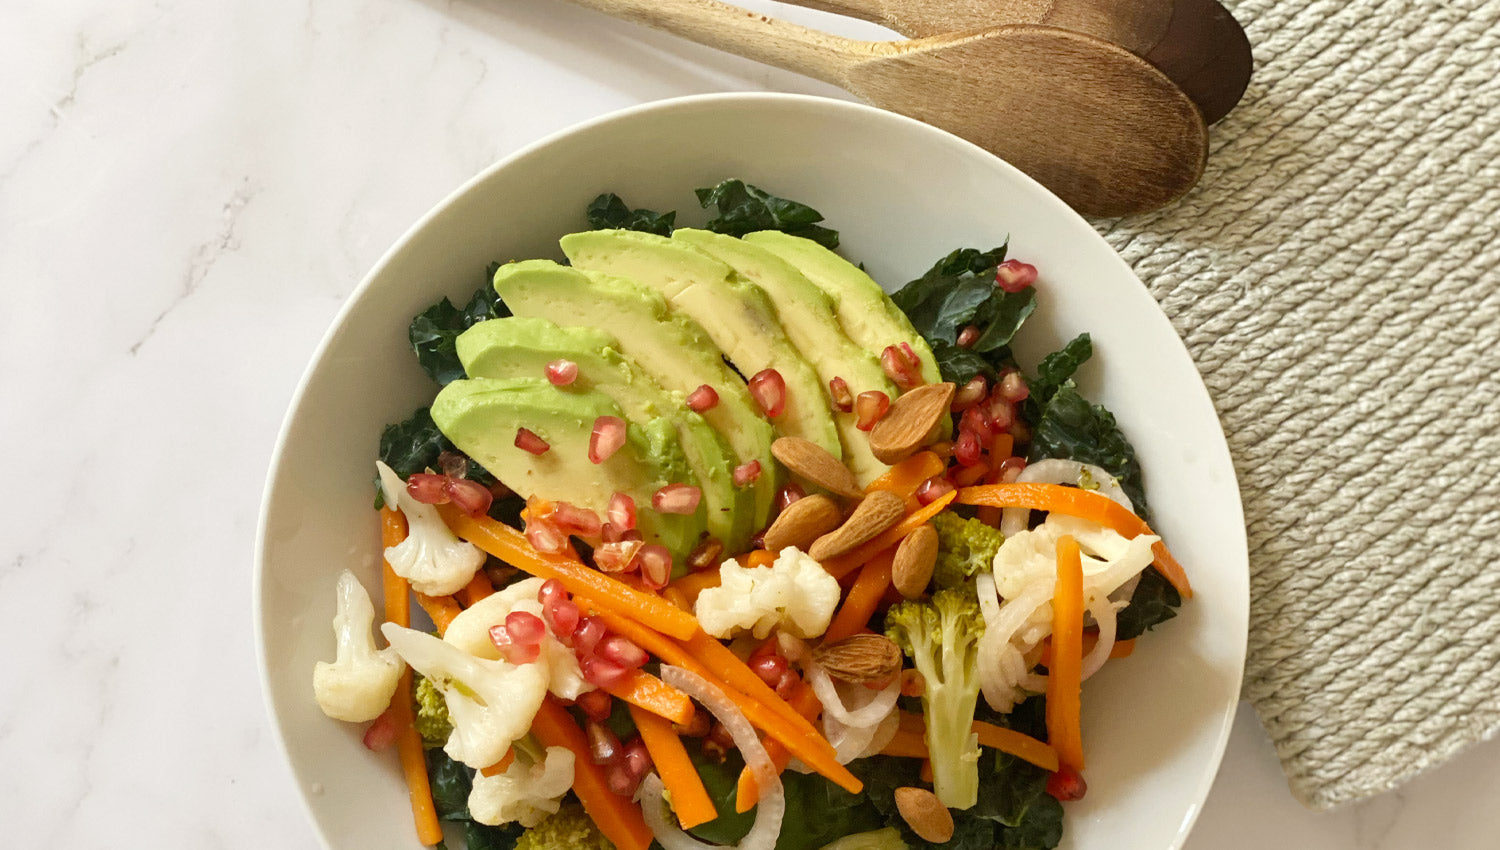 Kale Winter Salad With Pickled Veggies